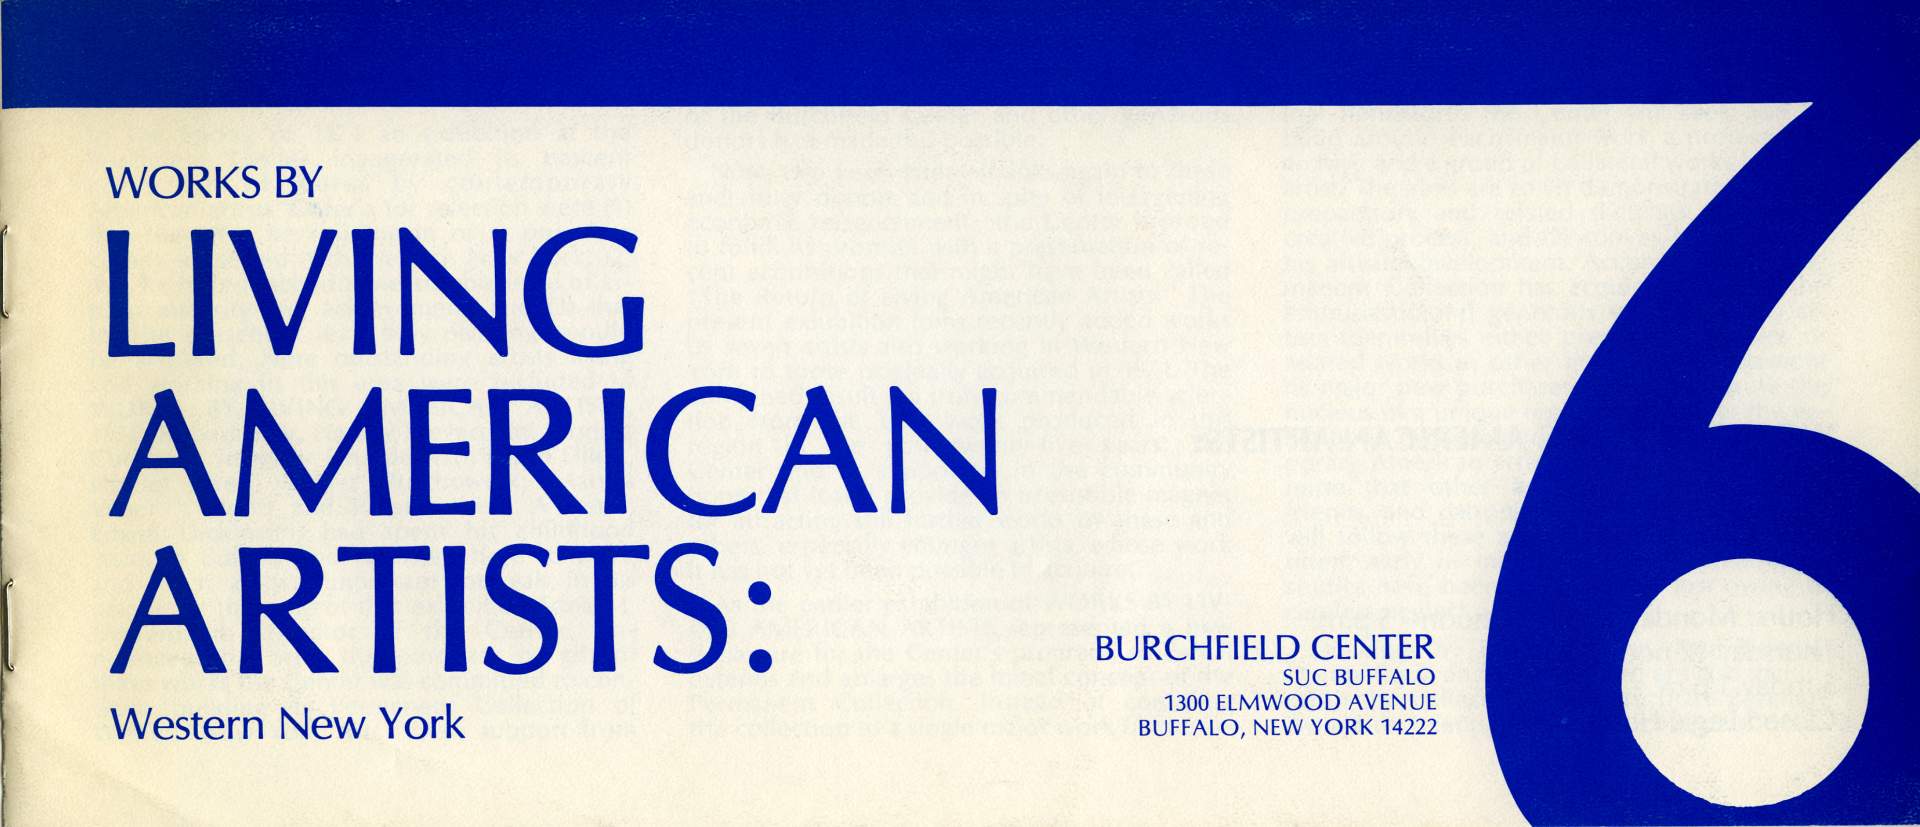 Works by Living American Artists: Western New York exhibition program cover